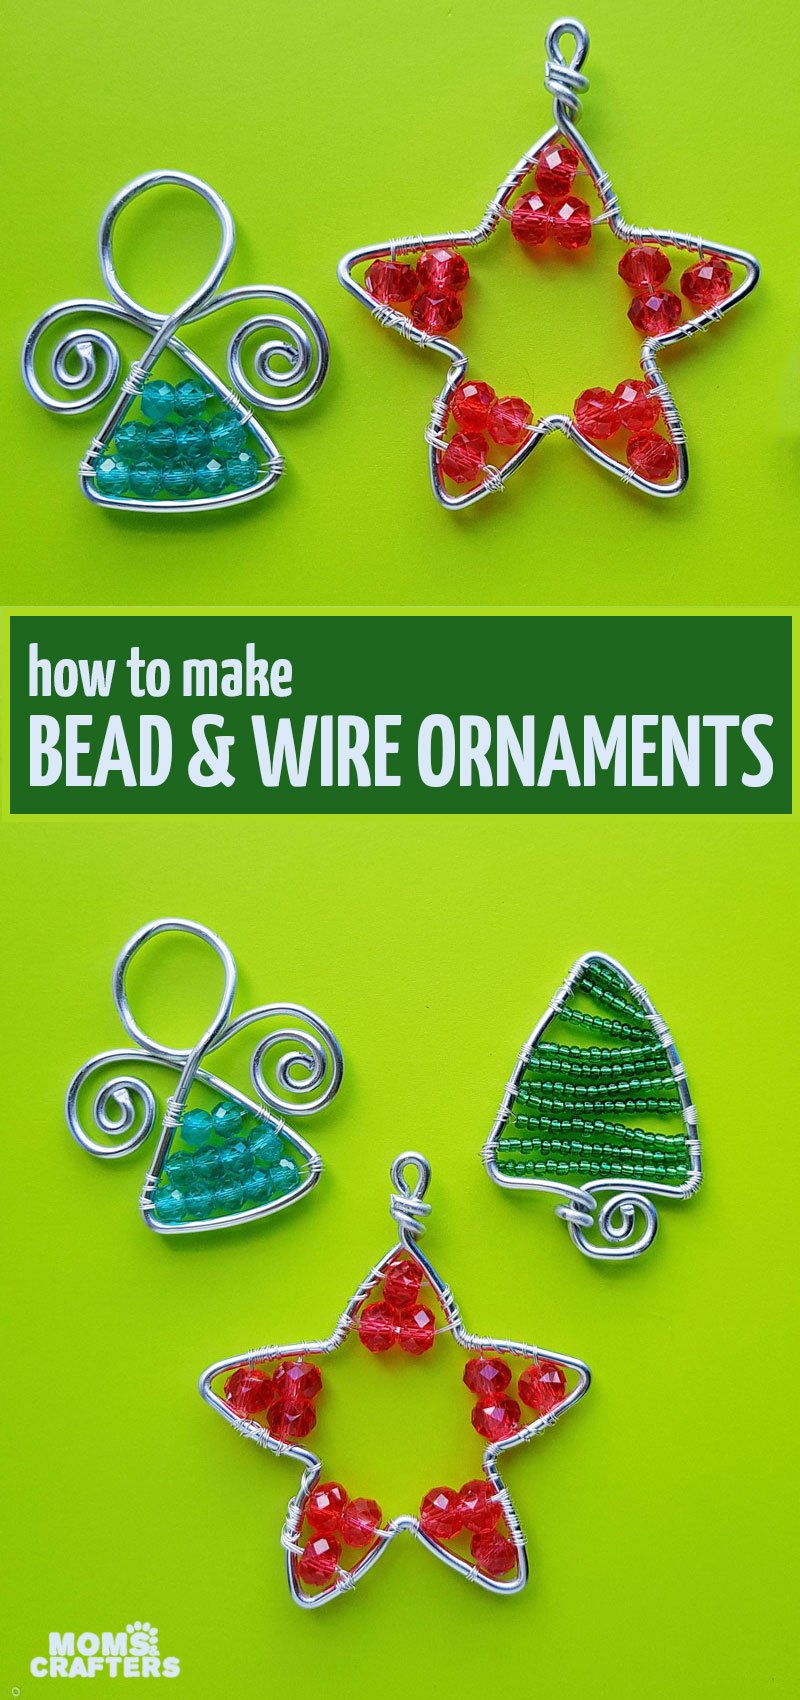 Learn how to make wire wrapped ornaments using beads and wire! This fun easy Christmas craft and DIY project for adults is great for beginners and makes great jewelry too. Includes angel ornaments, wire wrapped Christmas Trees and a star shaped beaded decoration too.